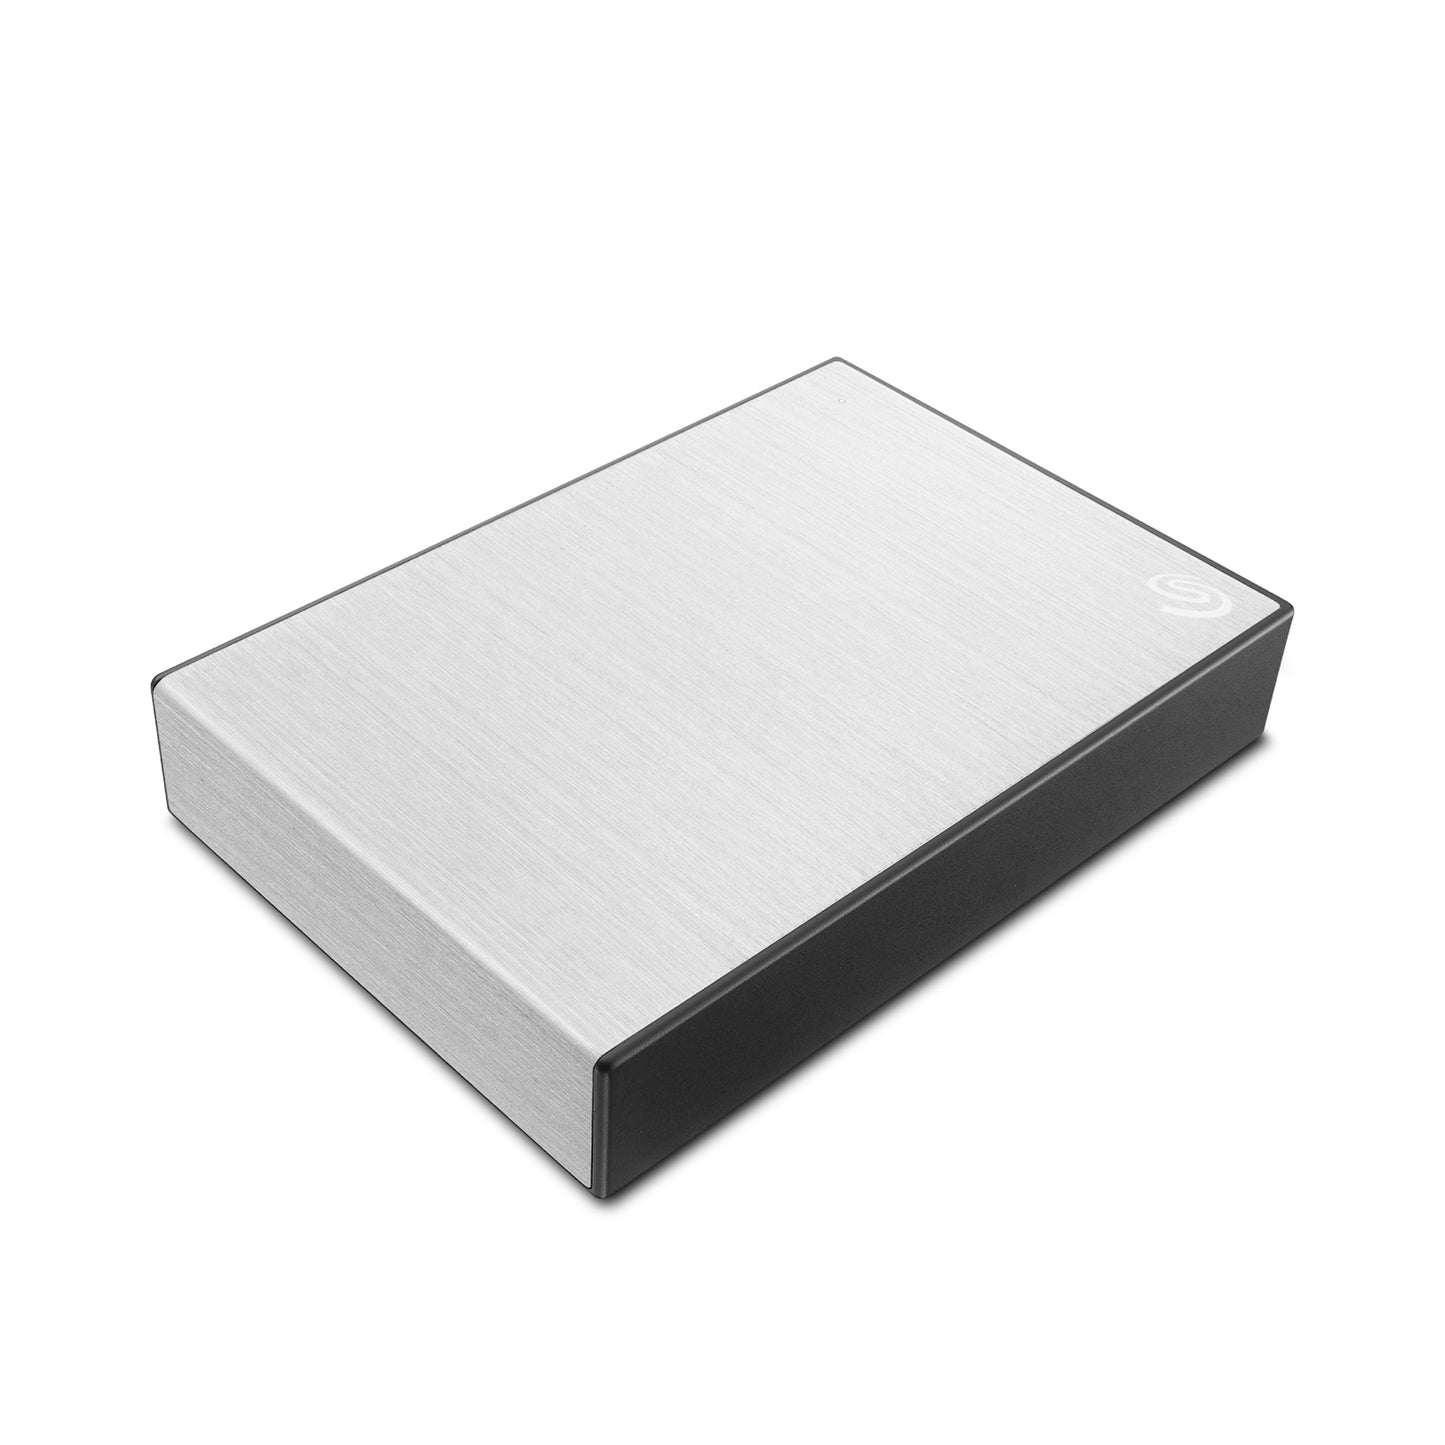 SEAGATE One Touch Slim USB 3.0 1TB - Space Grey